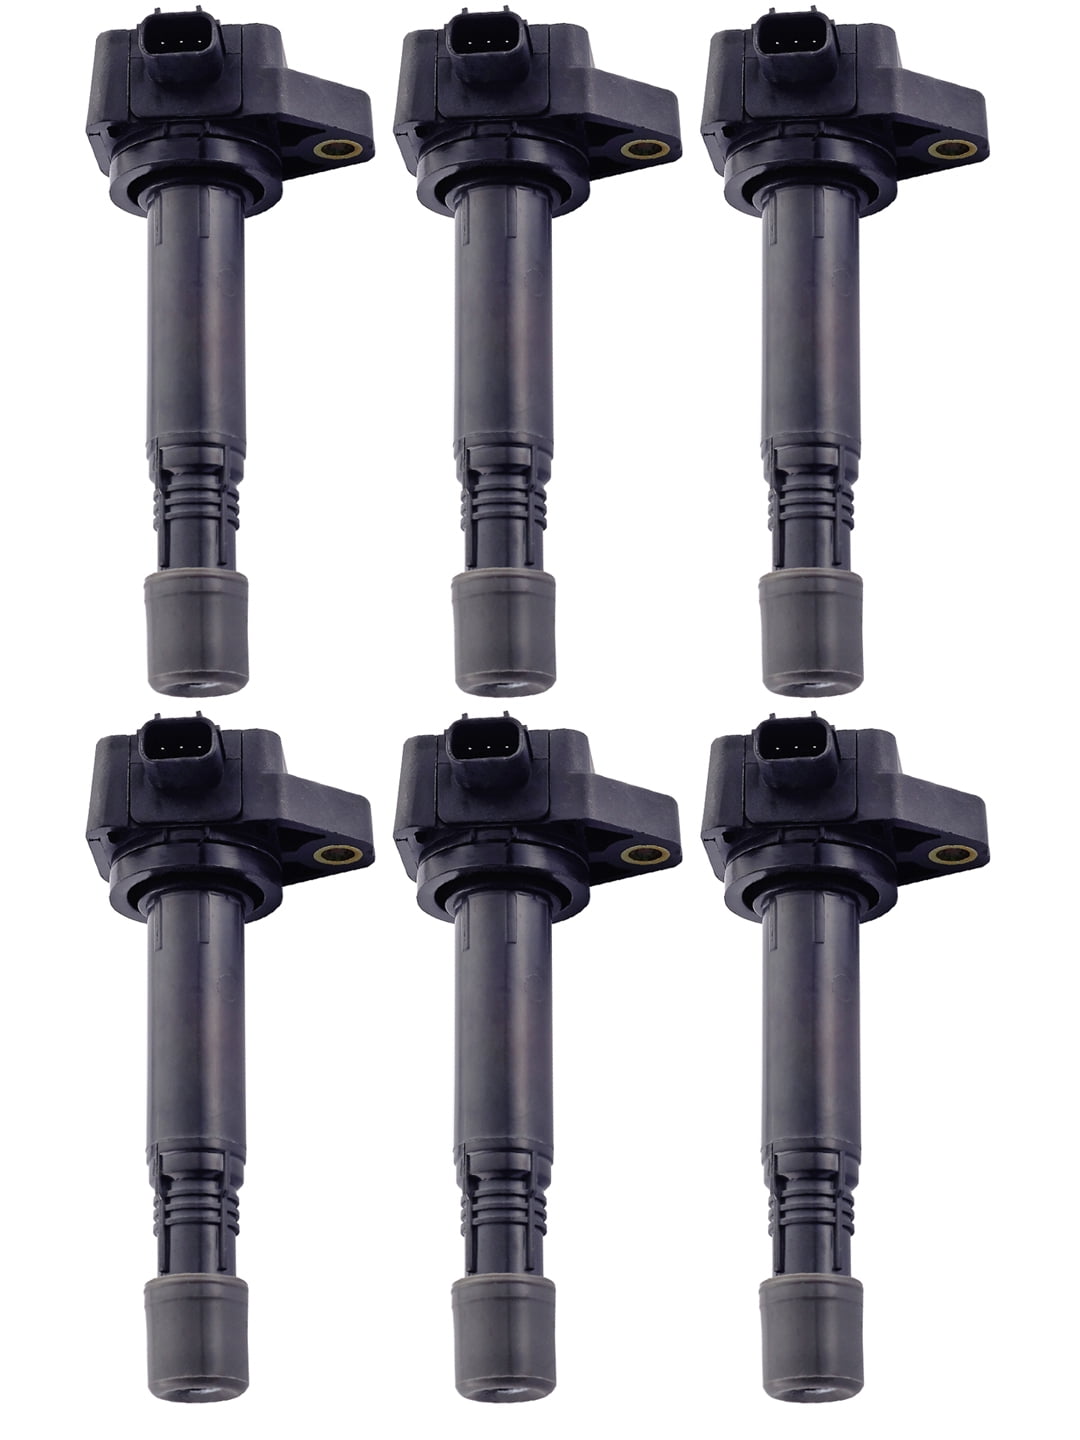 Automotive-leader 6Pcs UF242 Ignition Coils For Hond-a Accord Civic Odyssey Pilot Ridgeline Acur-a CL EL MDX RL TL Saturn Vue 1788303/5C1013/50063/C1221/C242/30520P8EA01/30520P8FA01/30520RCAA02 